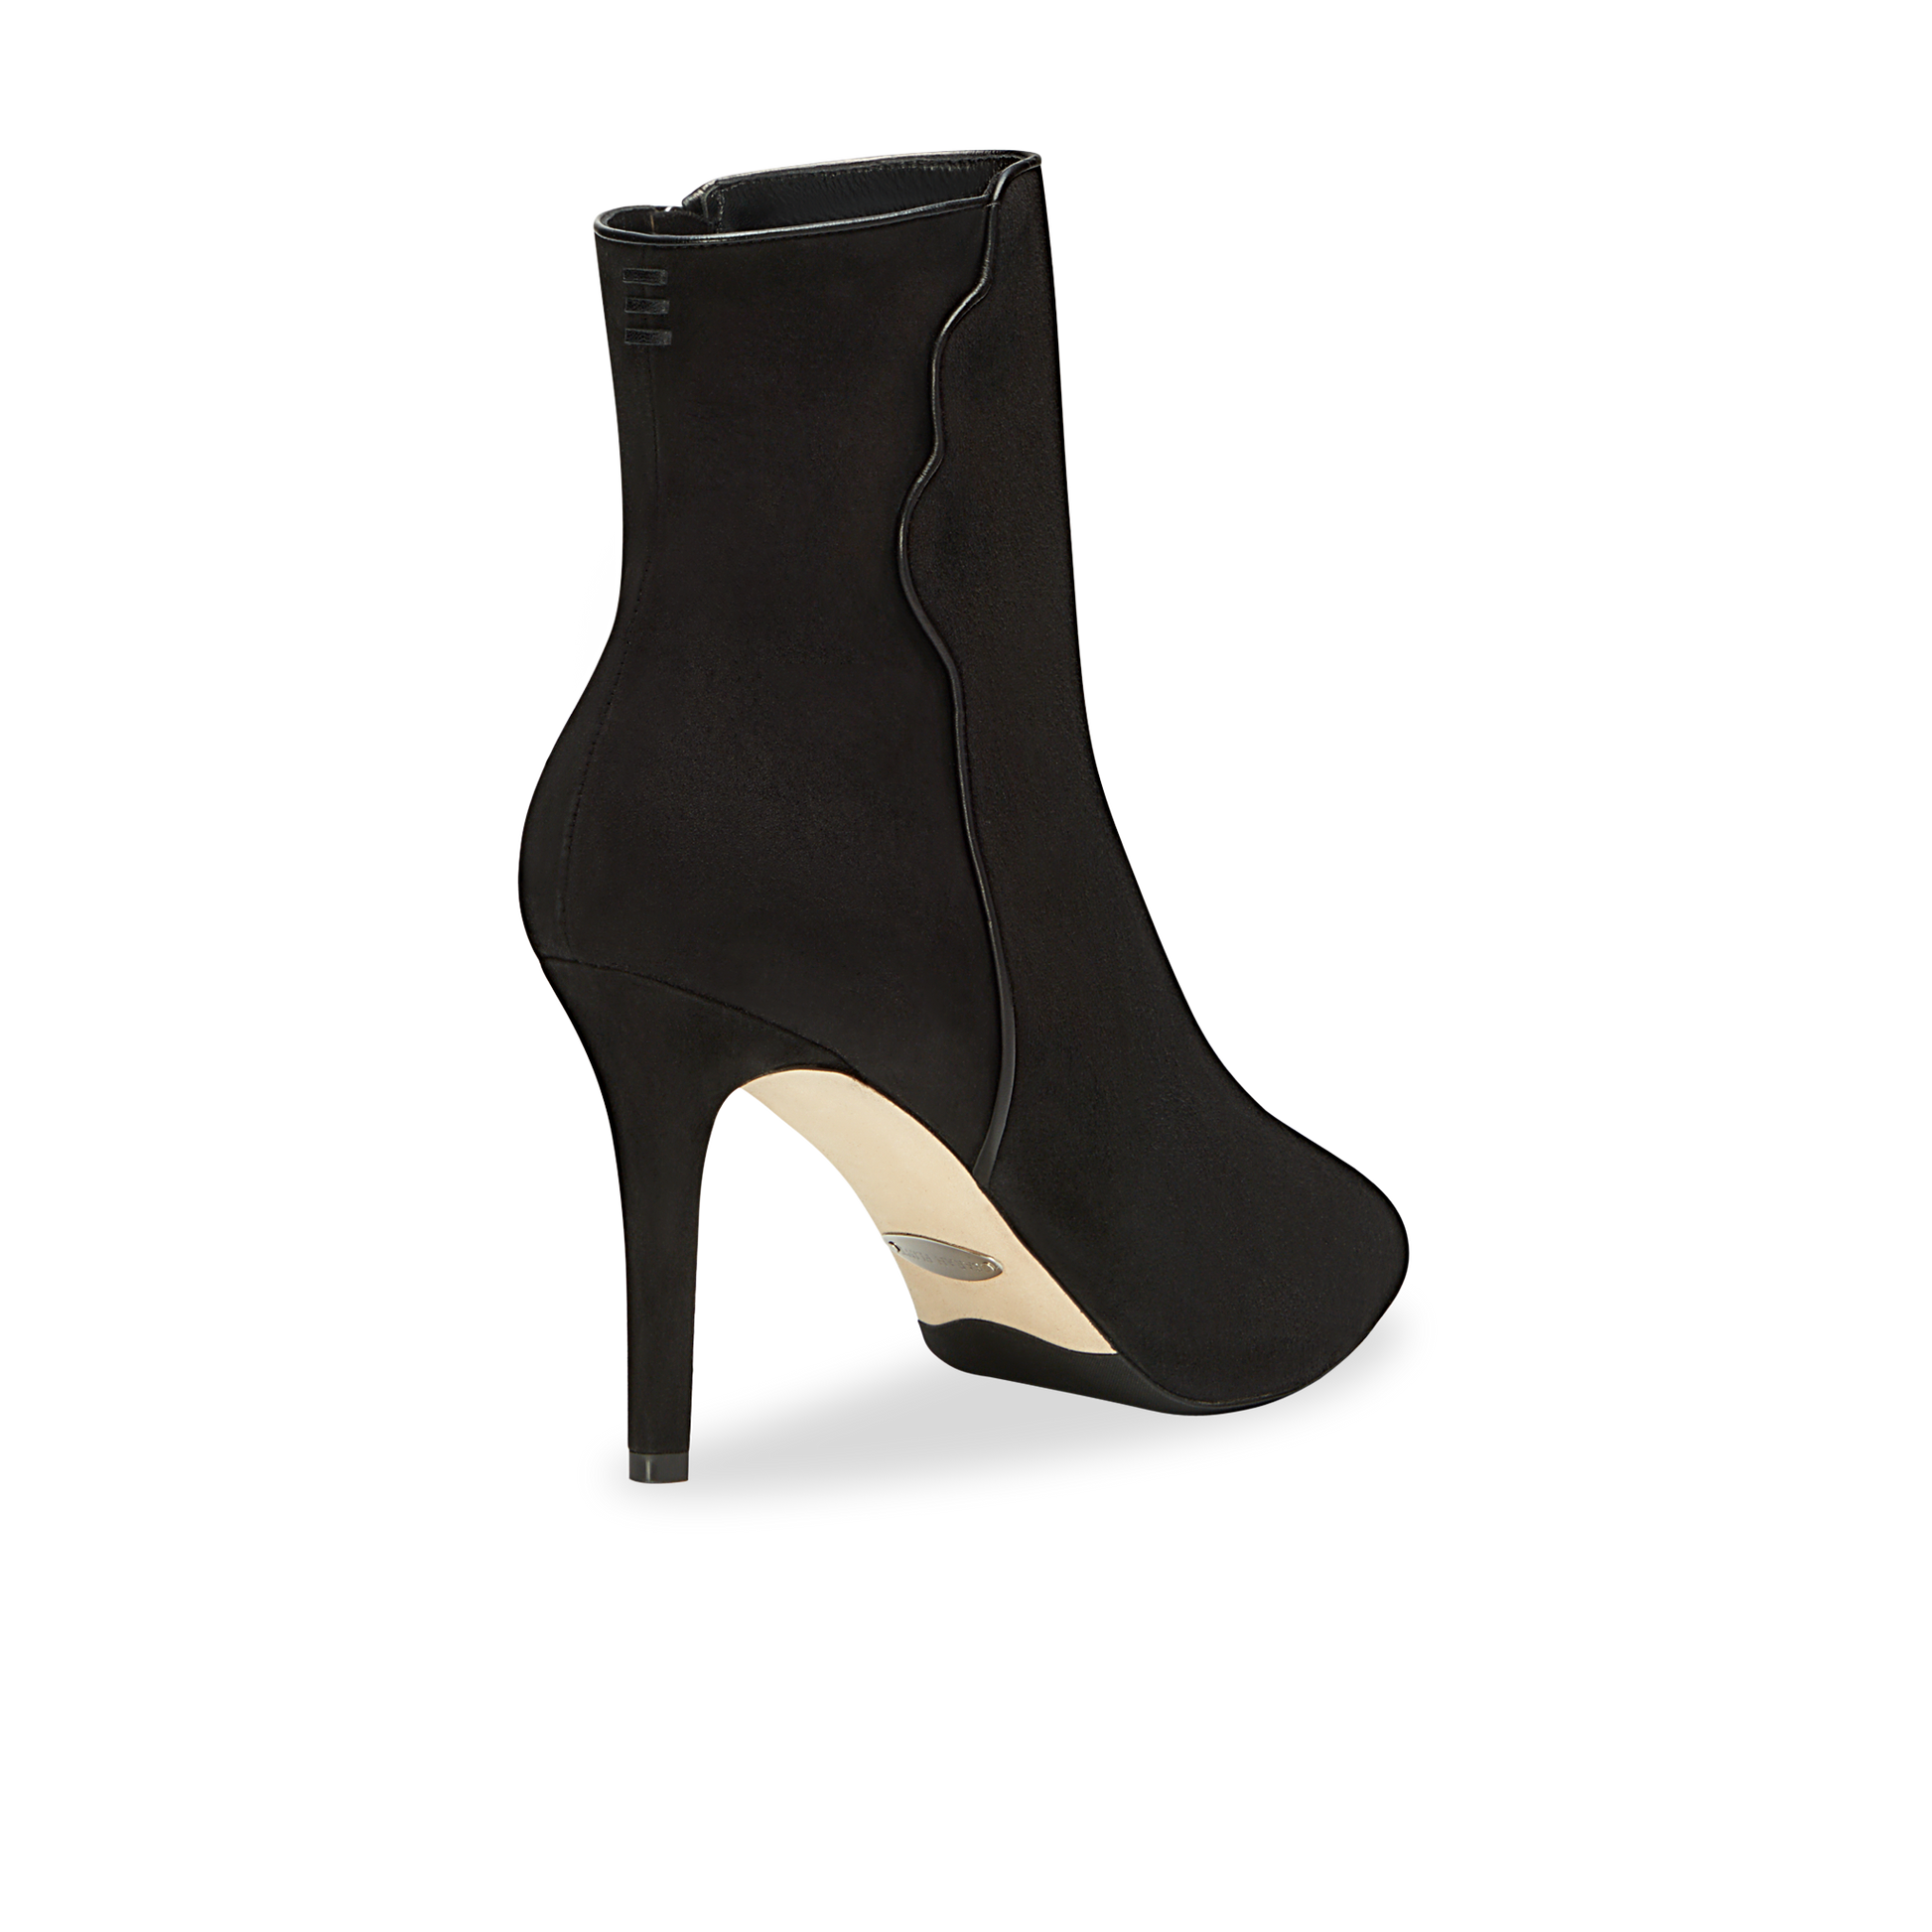 90mm Pointed Toe Perfect Dress Bootie Black Suede 